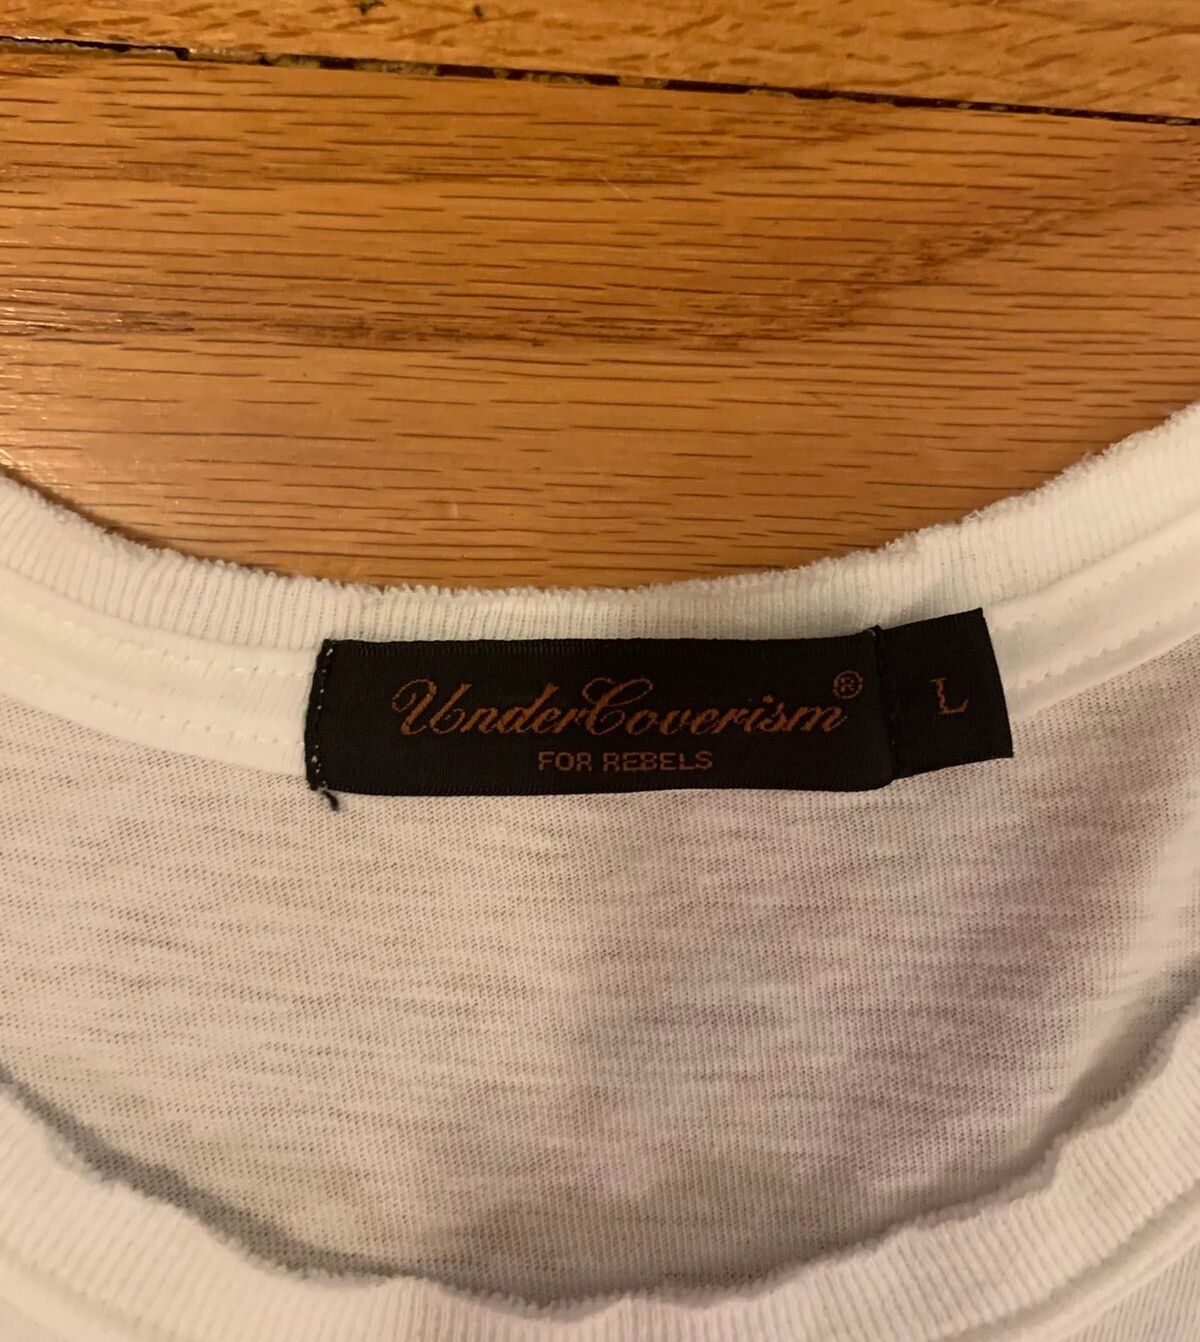 Undercover SS04 languid tee Size US L / EU 52-54 / 3 - 4 Thumbnail